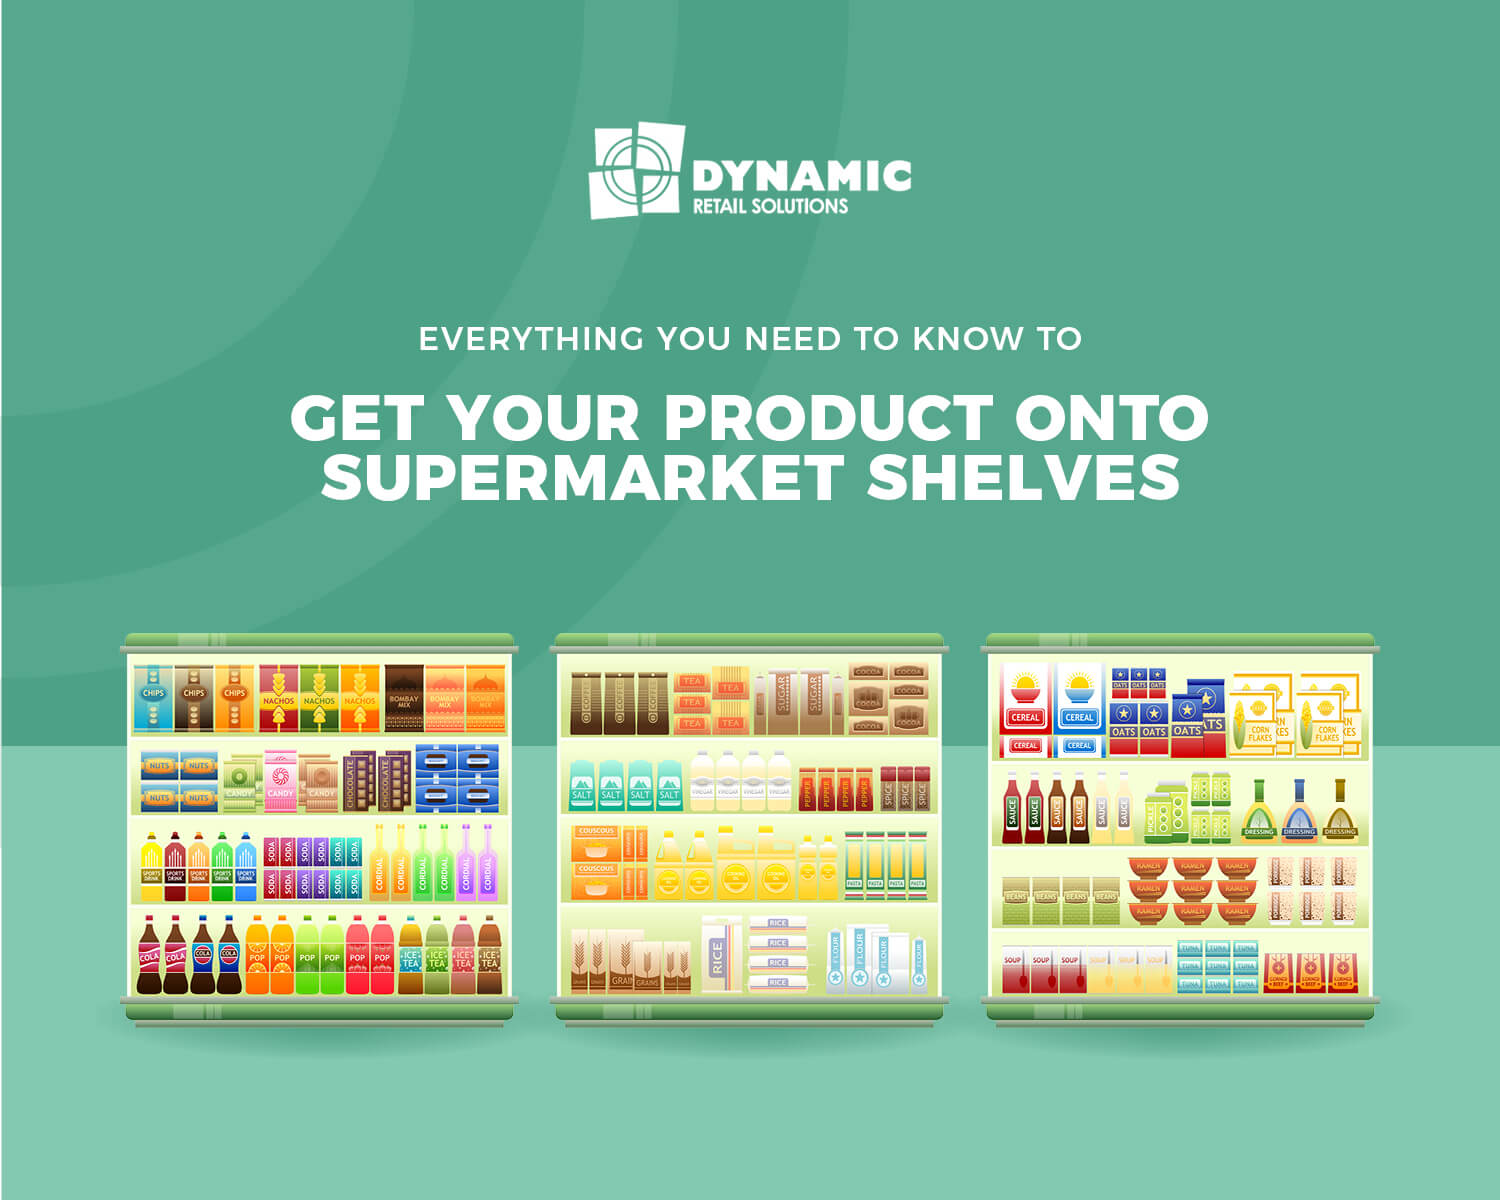 Everything You Need to Know to Get Your Product onto Supermarket Shelves